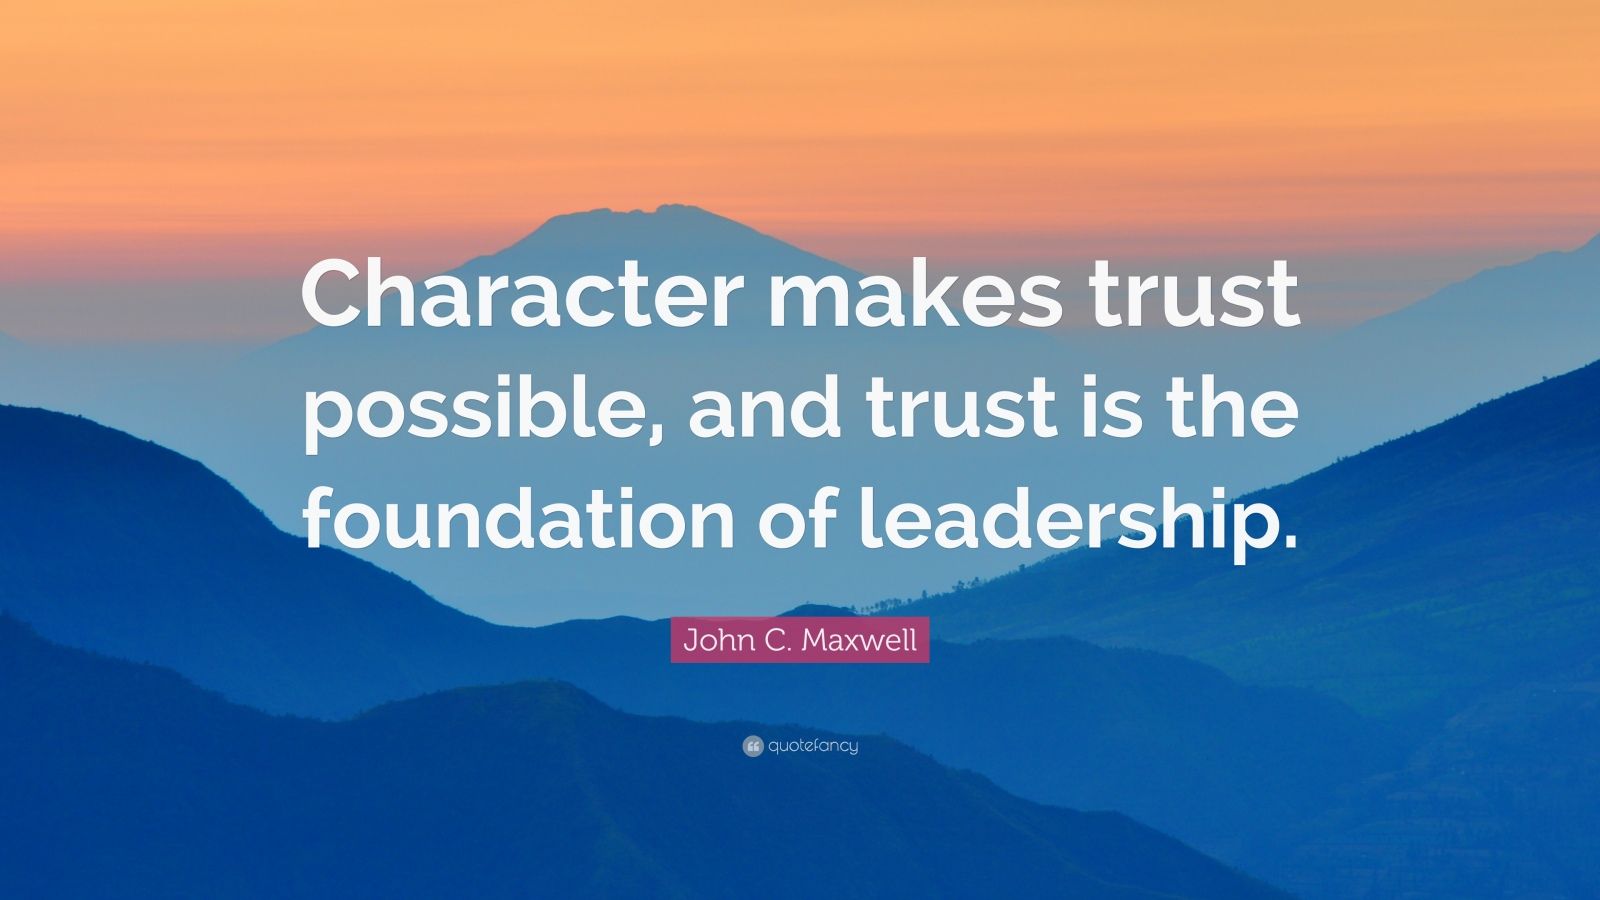 John C. Maxwell Quote: “Character makes trust possible, and trust is